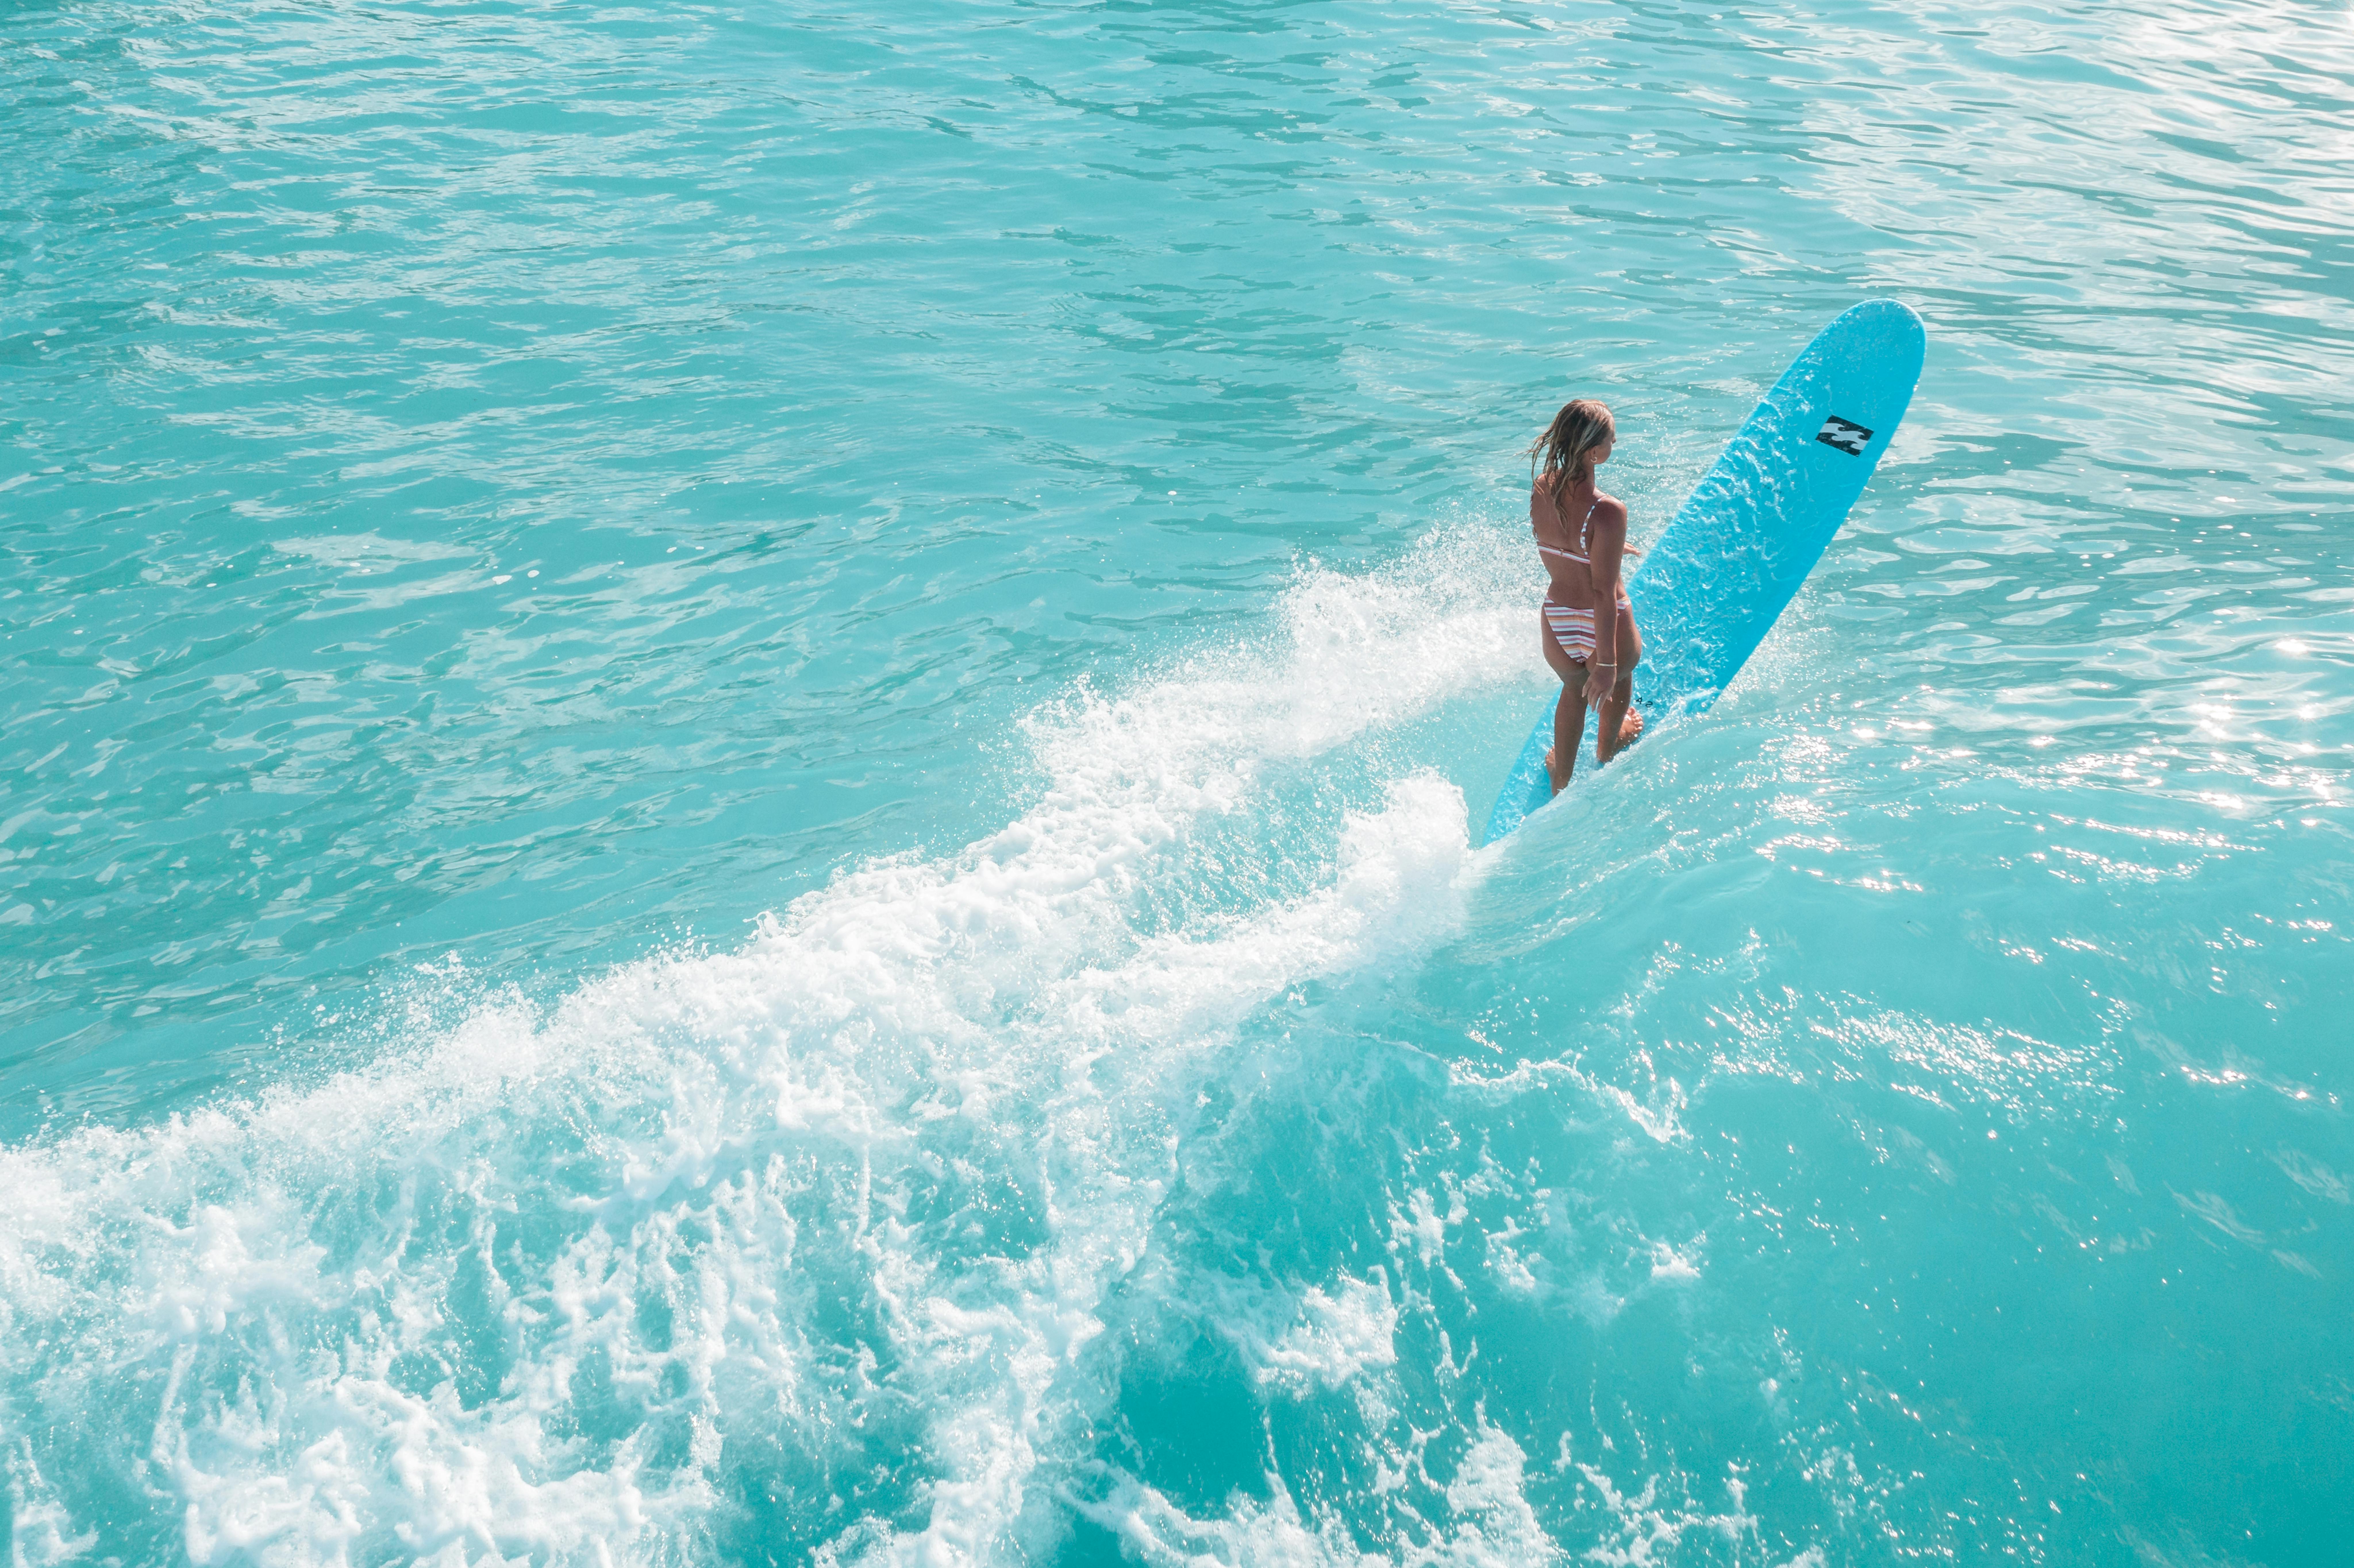 Can You Recommend Lesser-known Water Activities Like Windsurfing Or Kitesurfing?